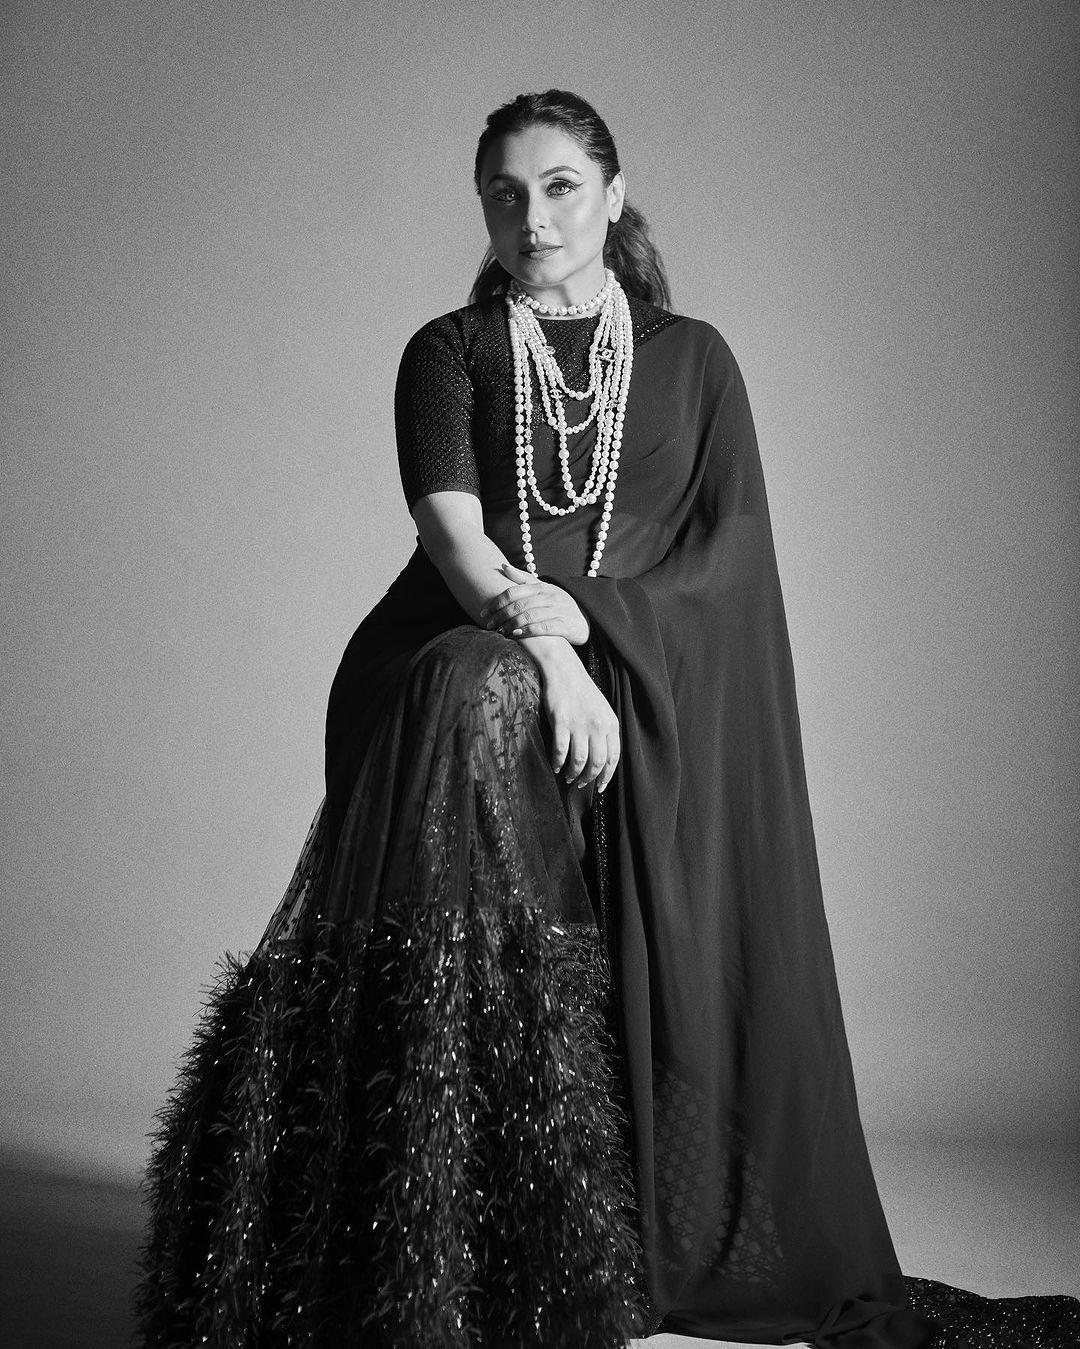 True to her name, Rani looks every bit like royalty in this Sabyasachi ensemble. She also reminds one of the classic look of '60s actresses